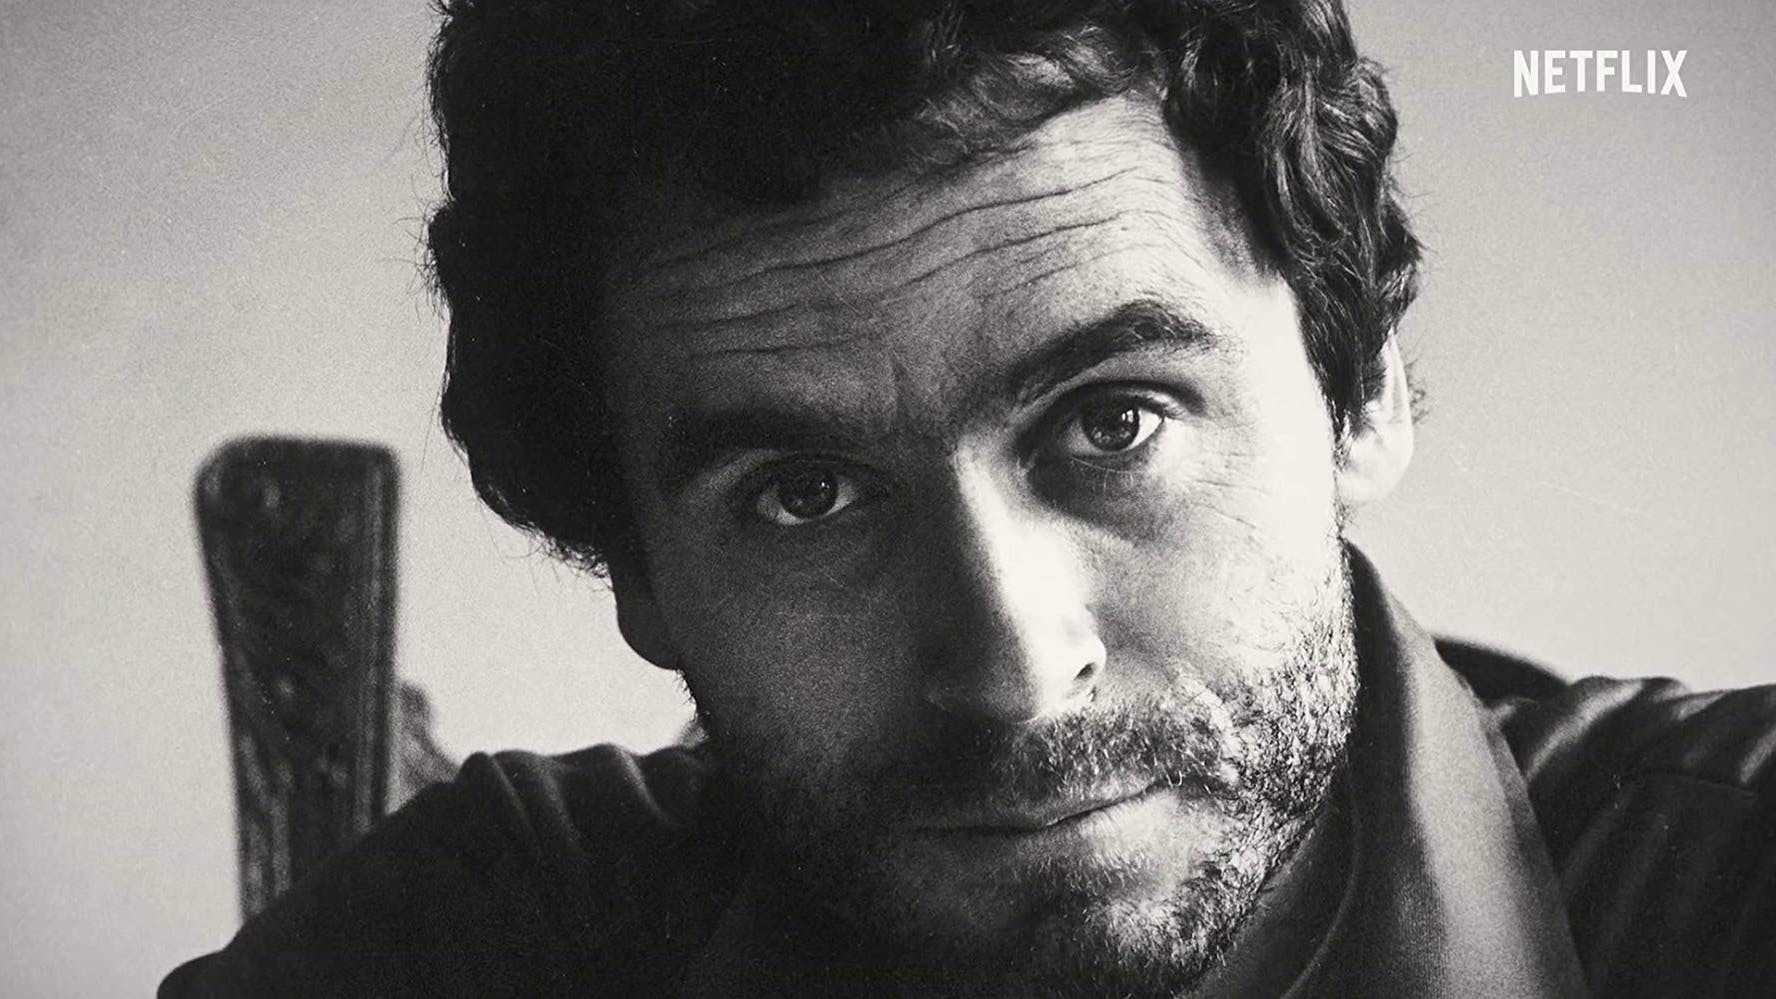 Anmeldelse af Conversations with a Killer: The Ted Bundy Tapes